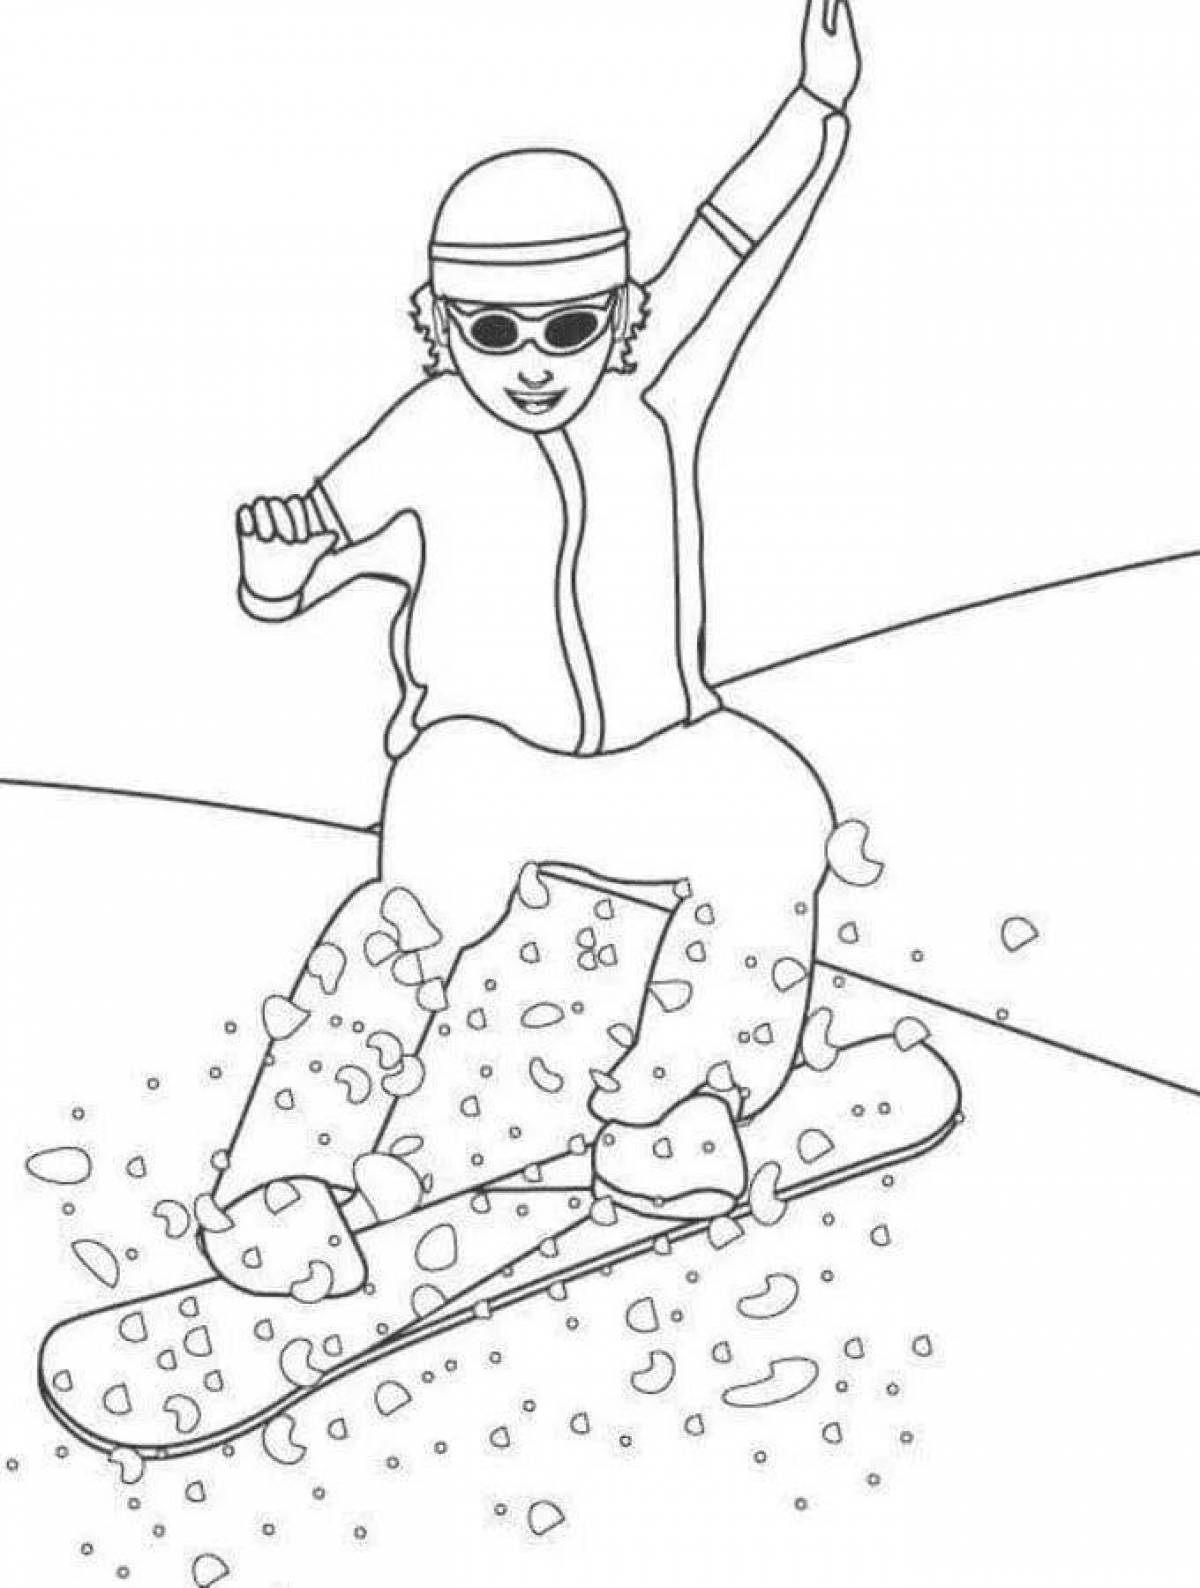 Lively coloring winter sports for children